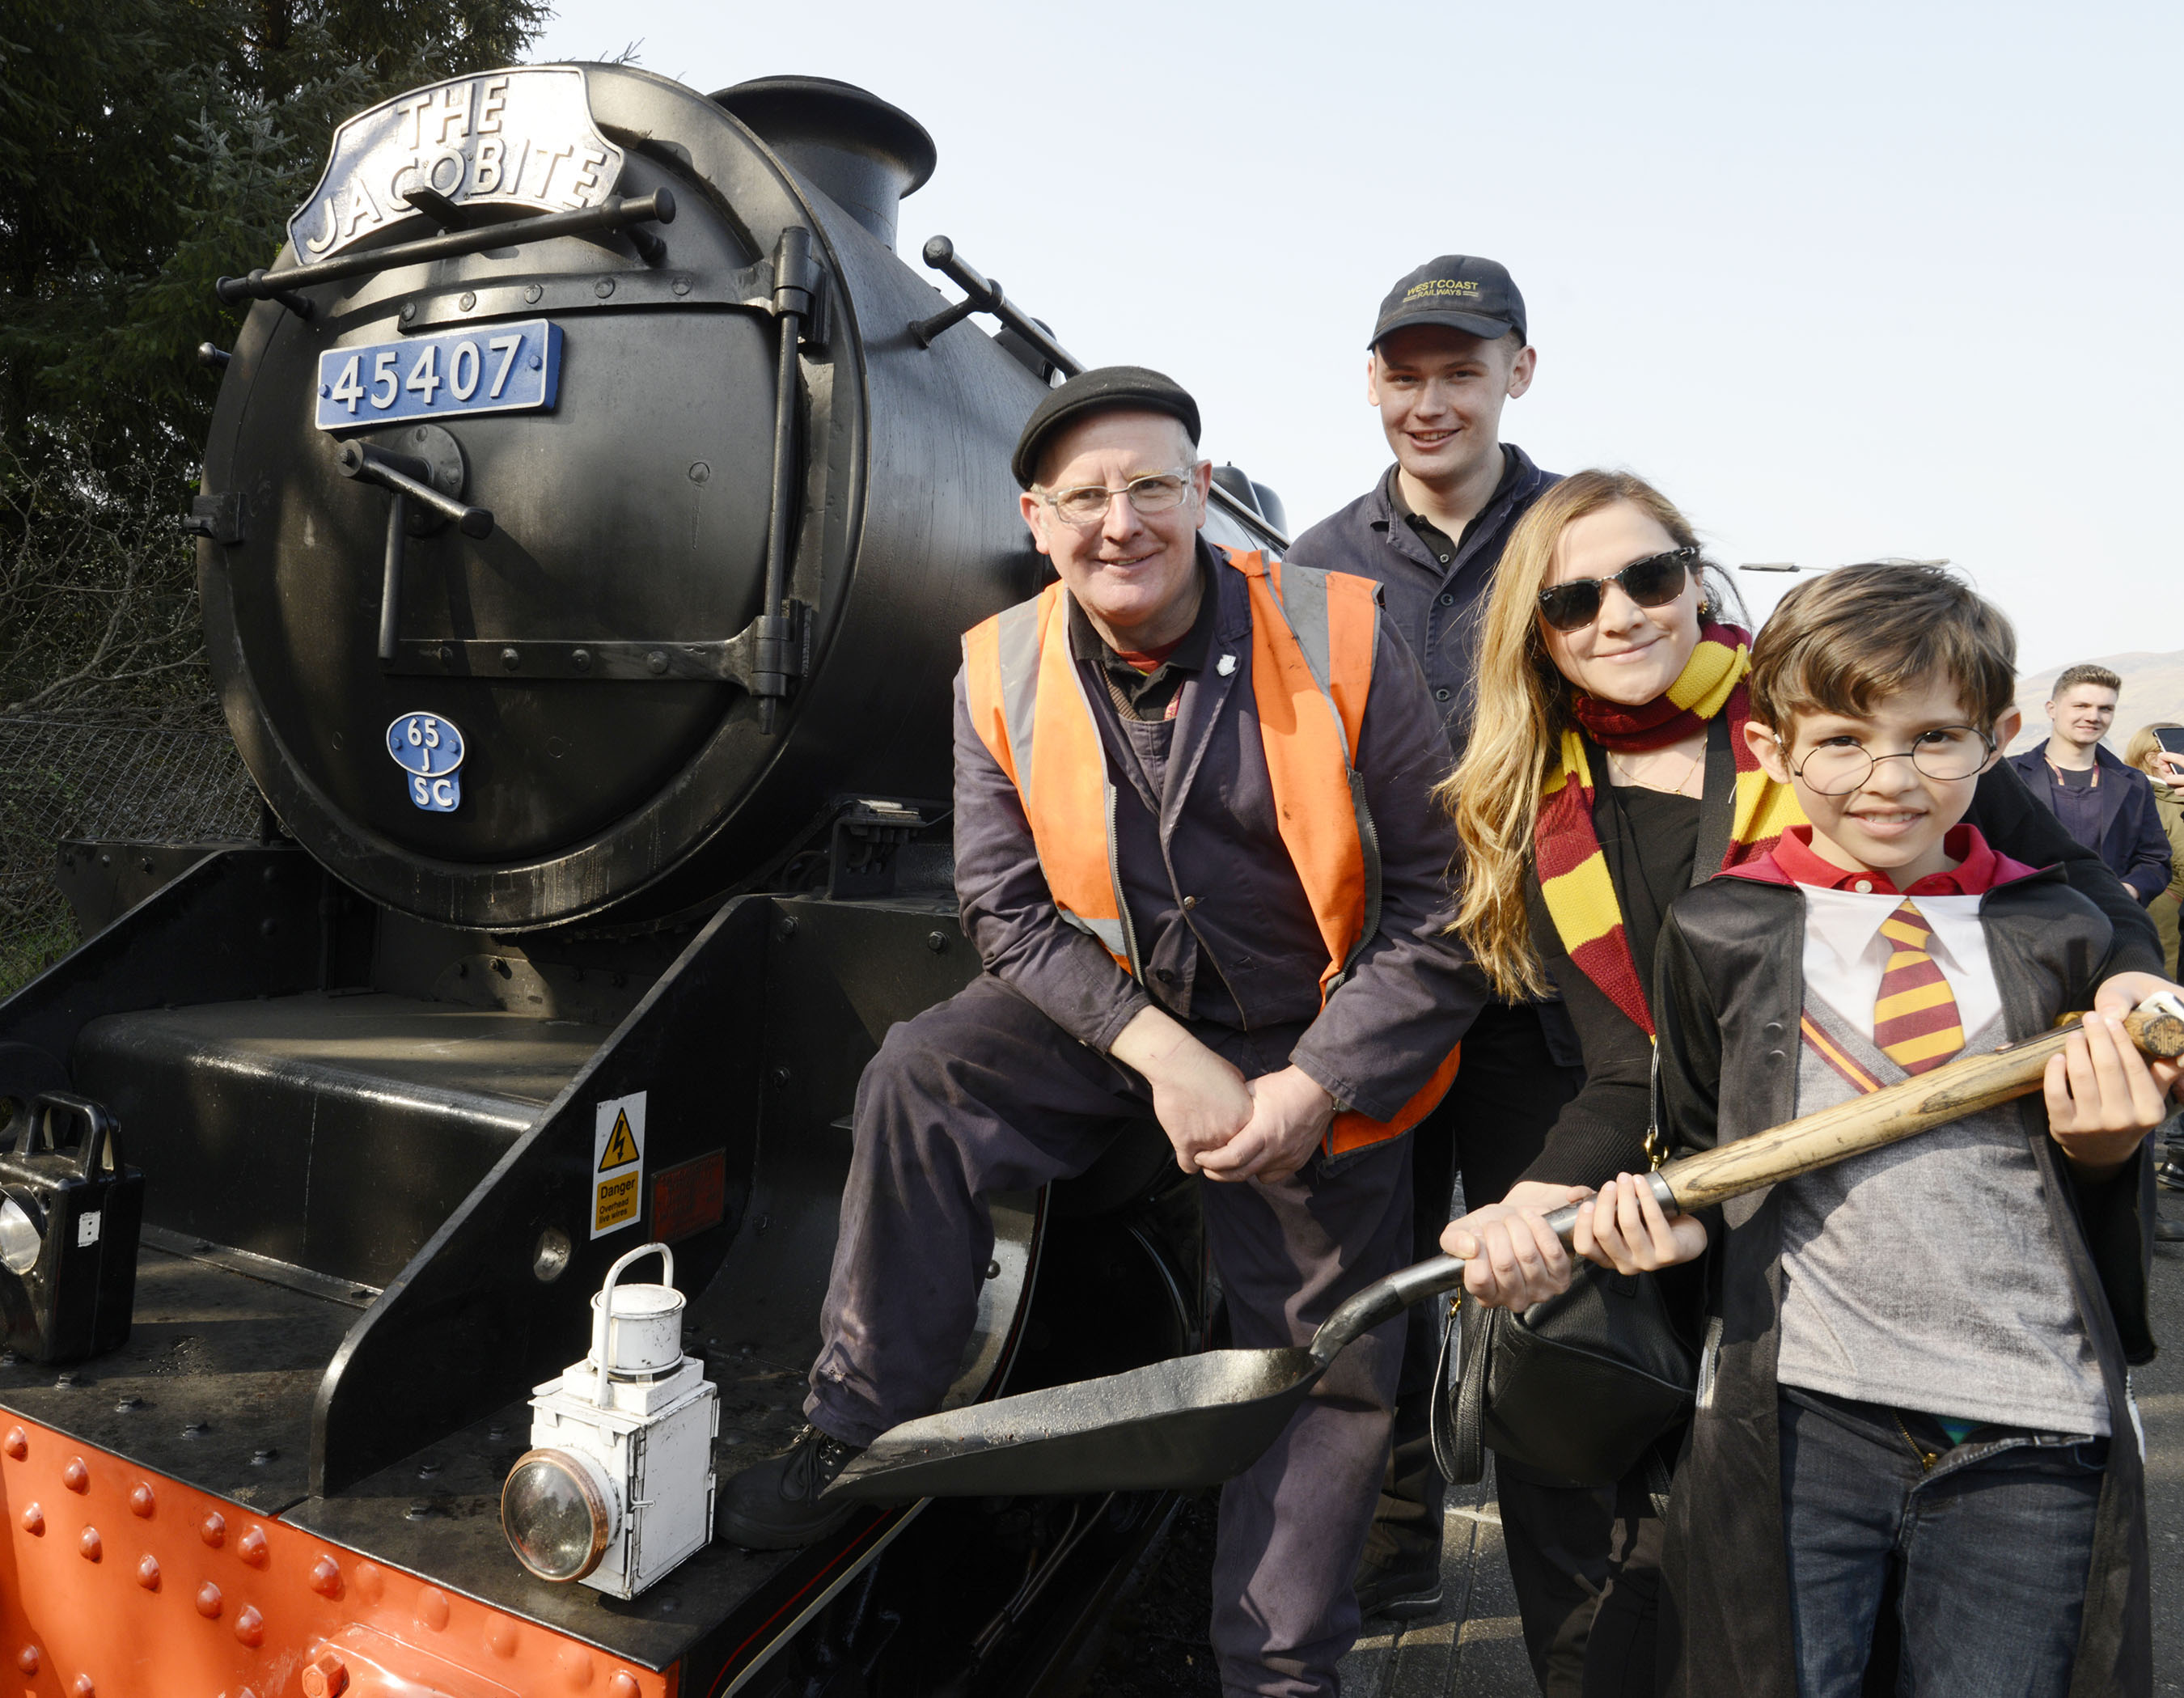 Lizeth Guerrero travelled from Mexico to take her nephew, Alex Galbraith for a trip on his favourite ‘Harry Potter’ steam train and was welcomed by Footplate crew Andy Simpkins (left) and Alex Johnston.